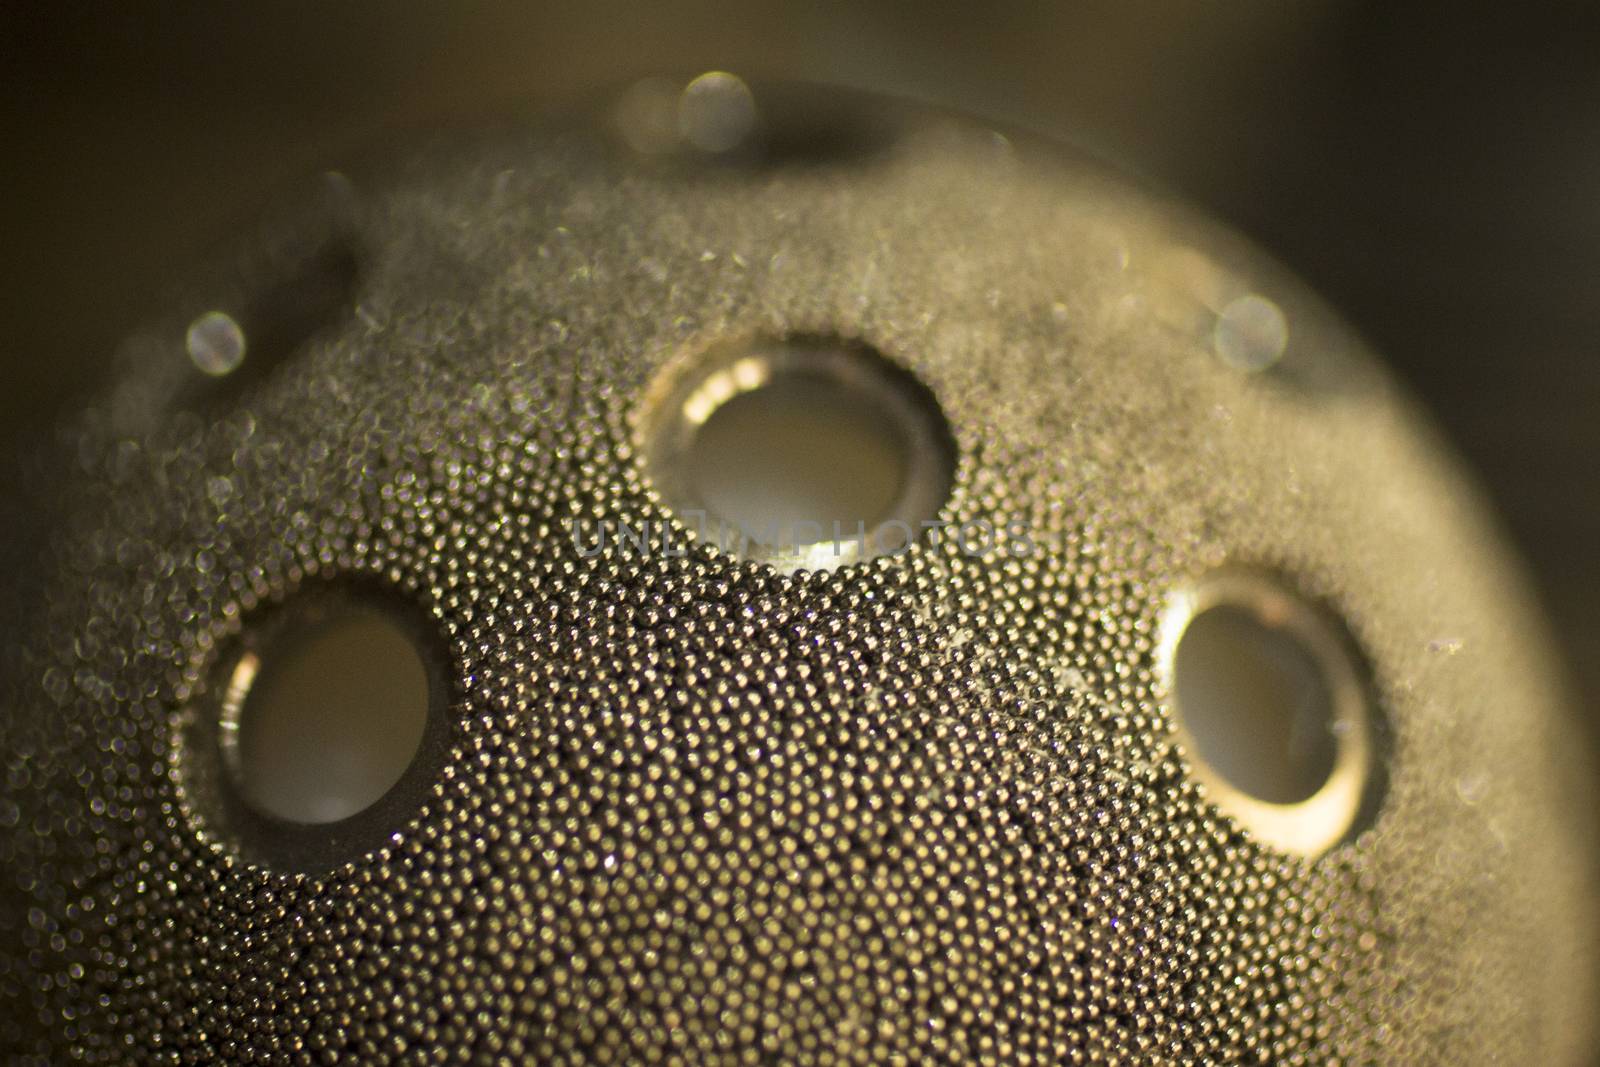 Closeup macro photograph of traumatology and orthopedic surgery metal hip ball joint implant with screw holes against plain background defocused.